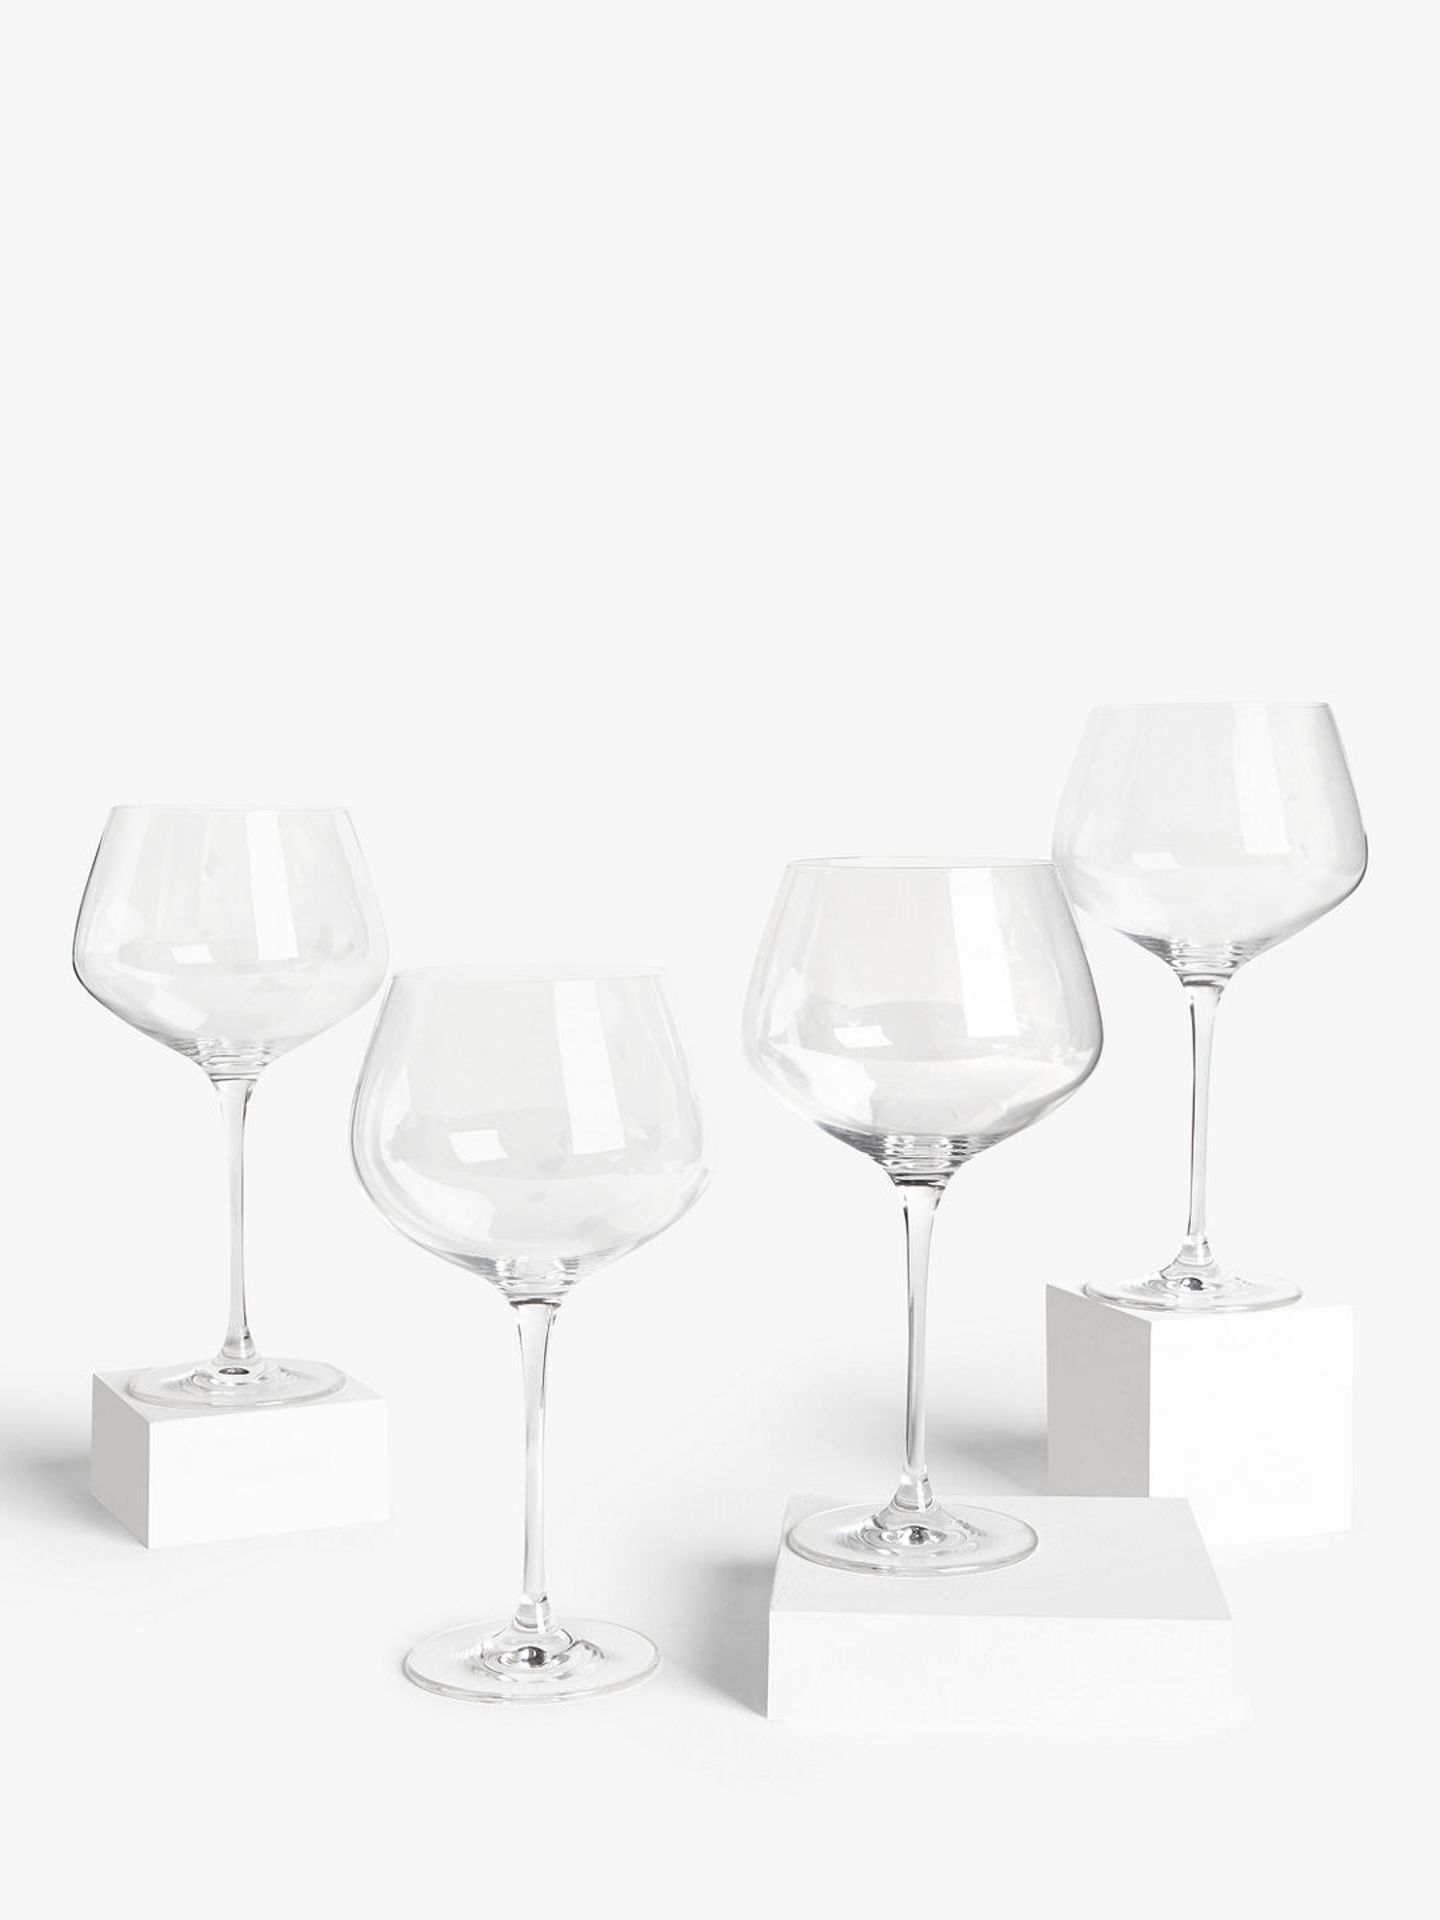 BRAND NEW COPA GIN GLASSES, SET OF 4, 720ML - Image 2 of 2